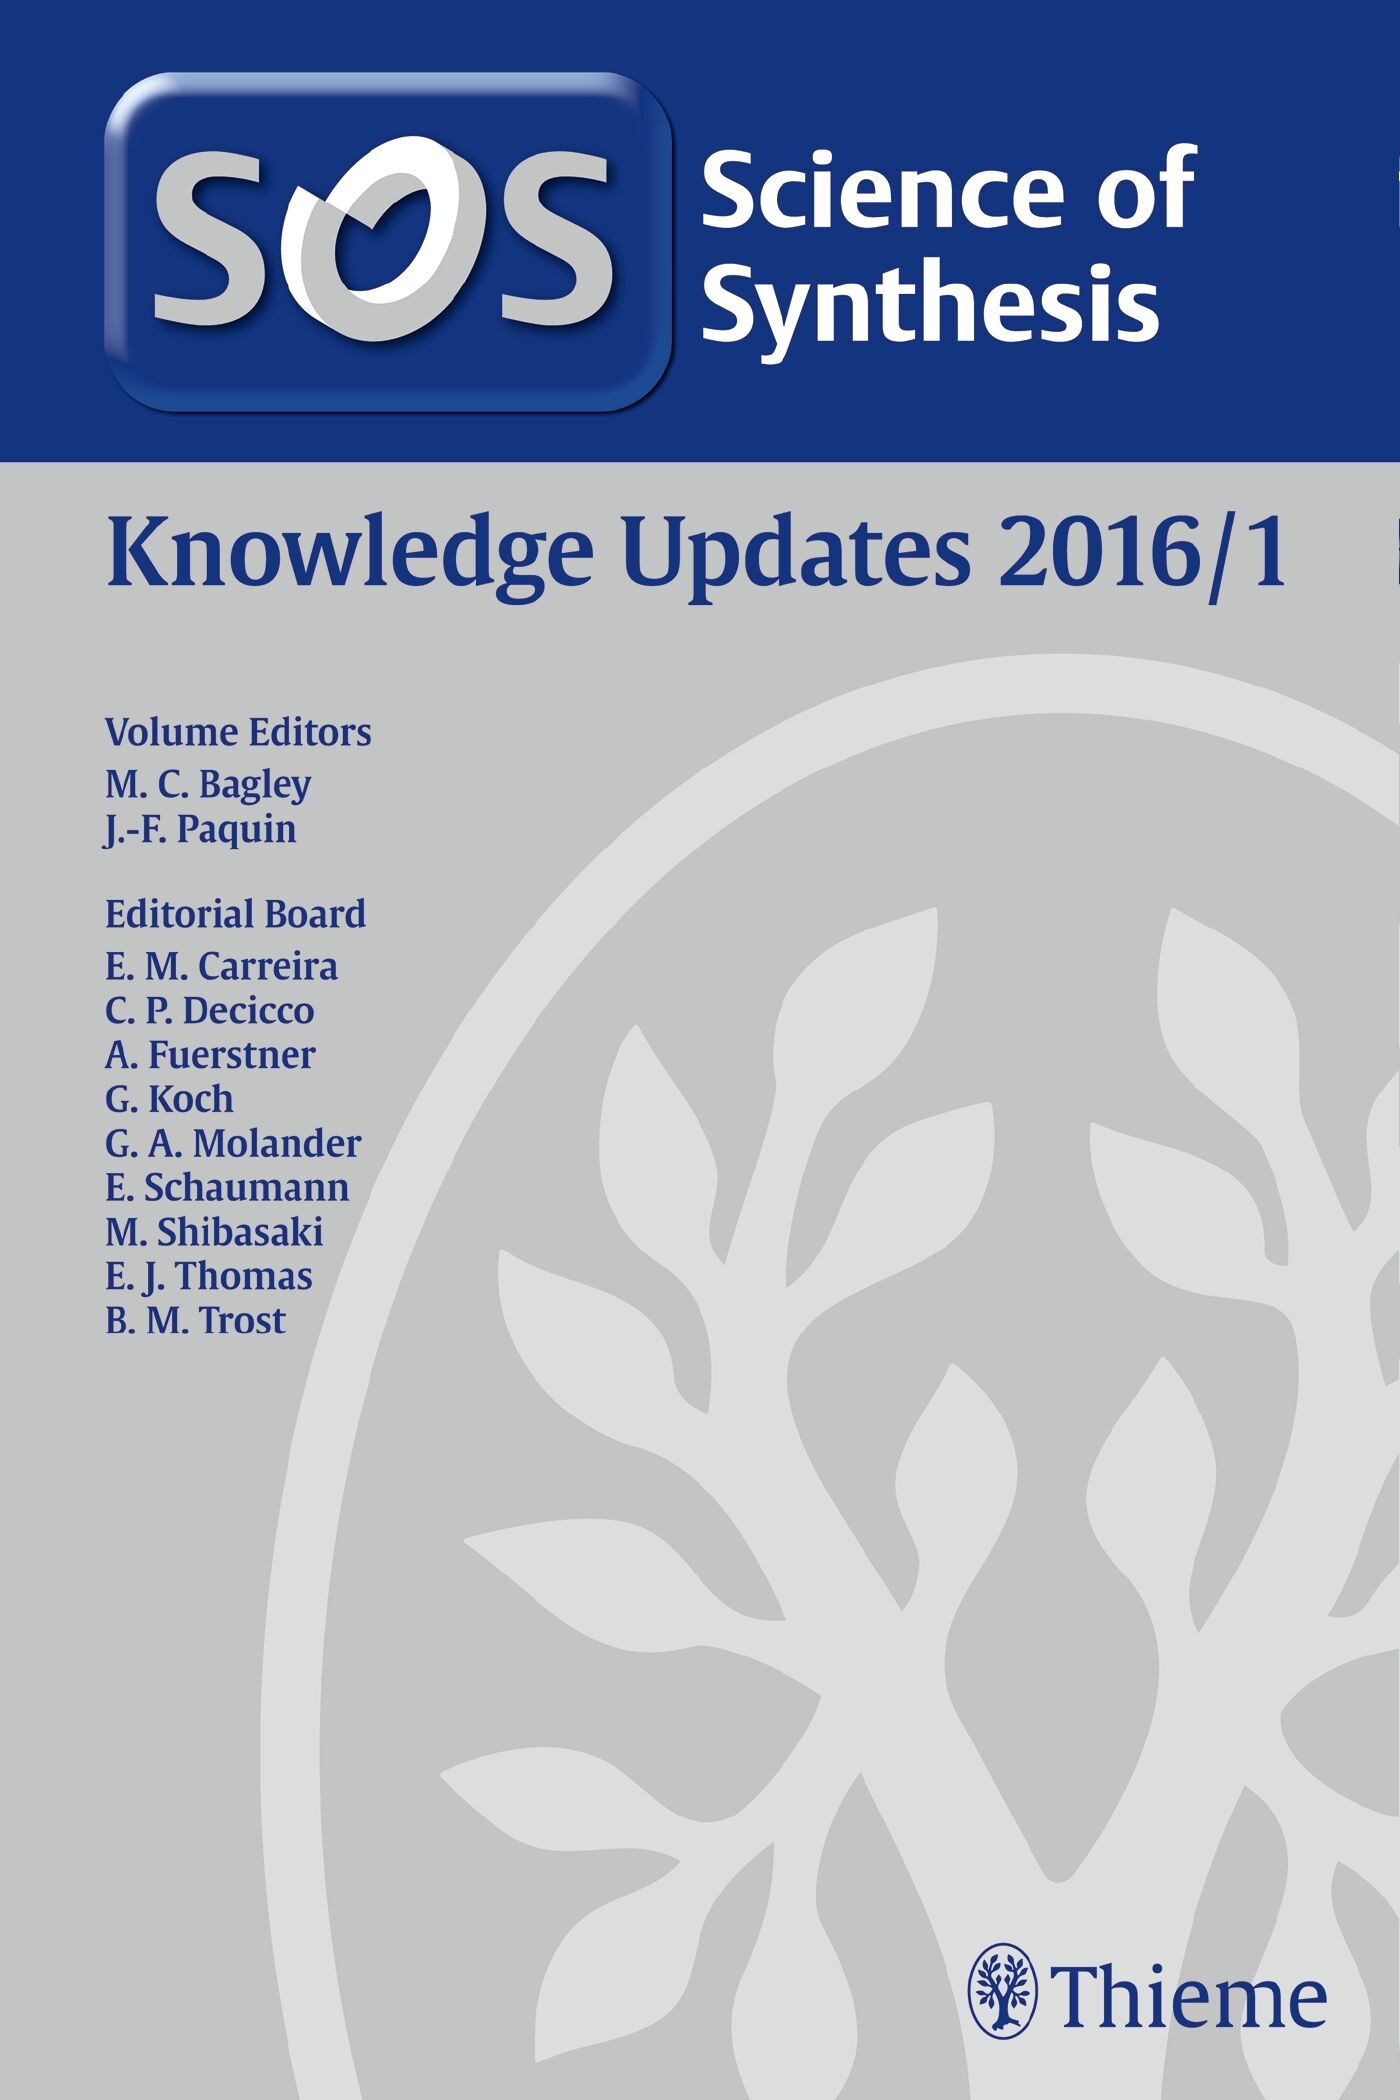 Science of Synthesis Knowledge Updates 2016 Vol. 1, 9783132208315